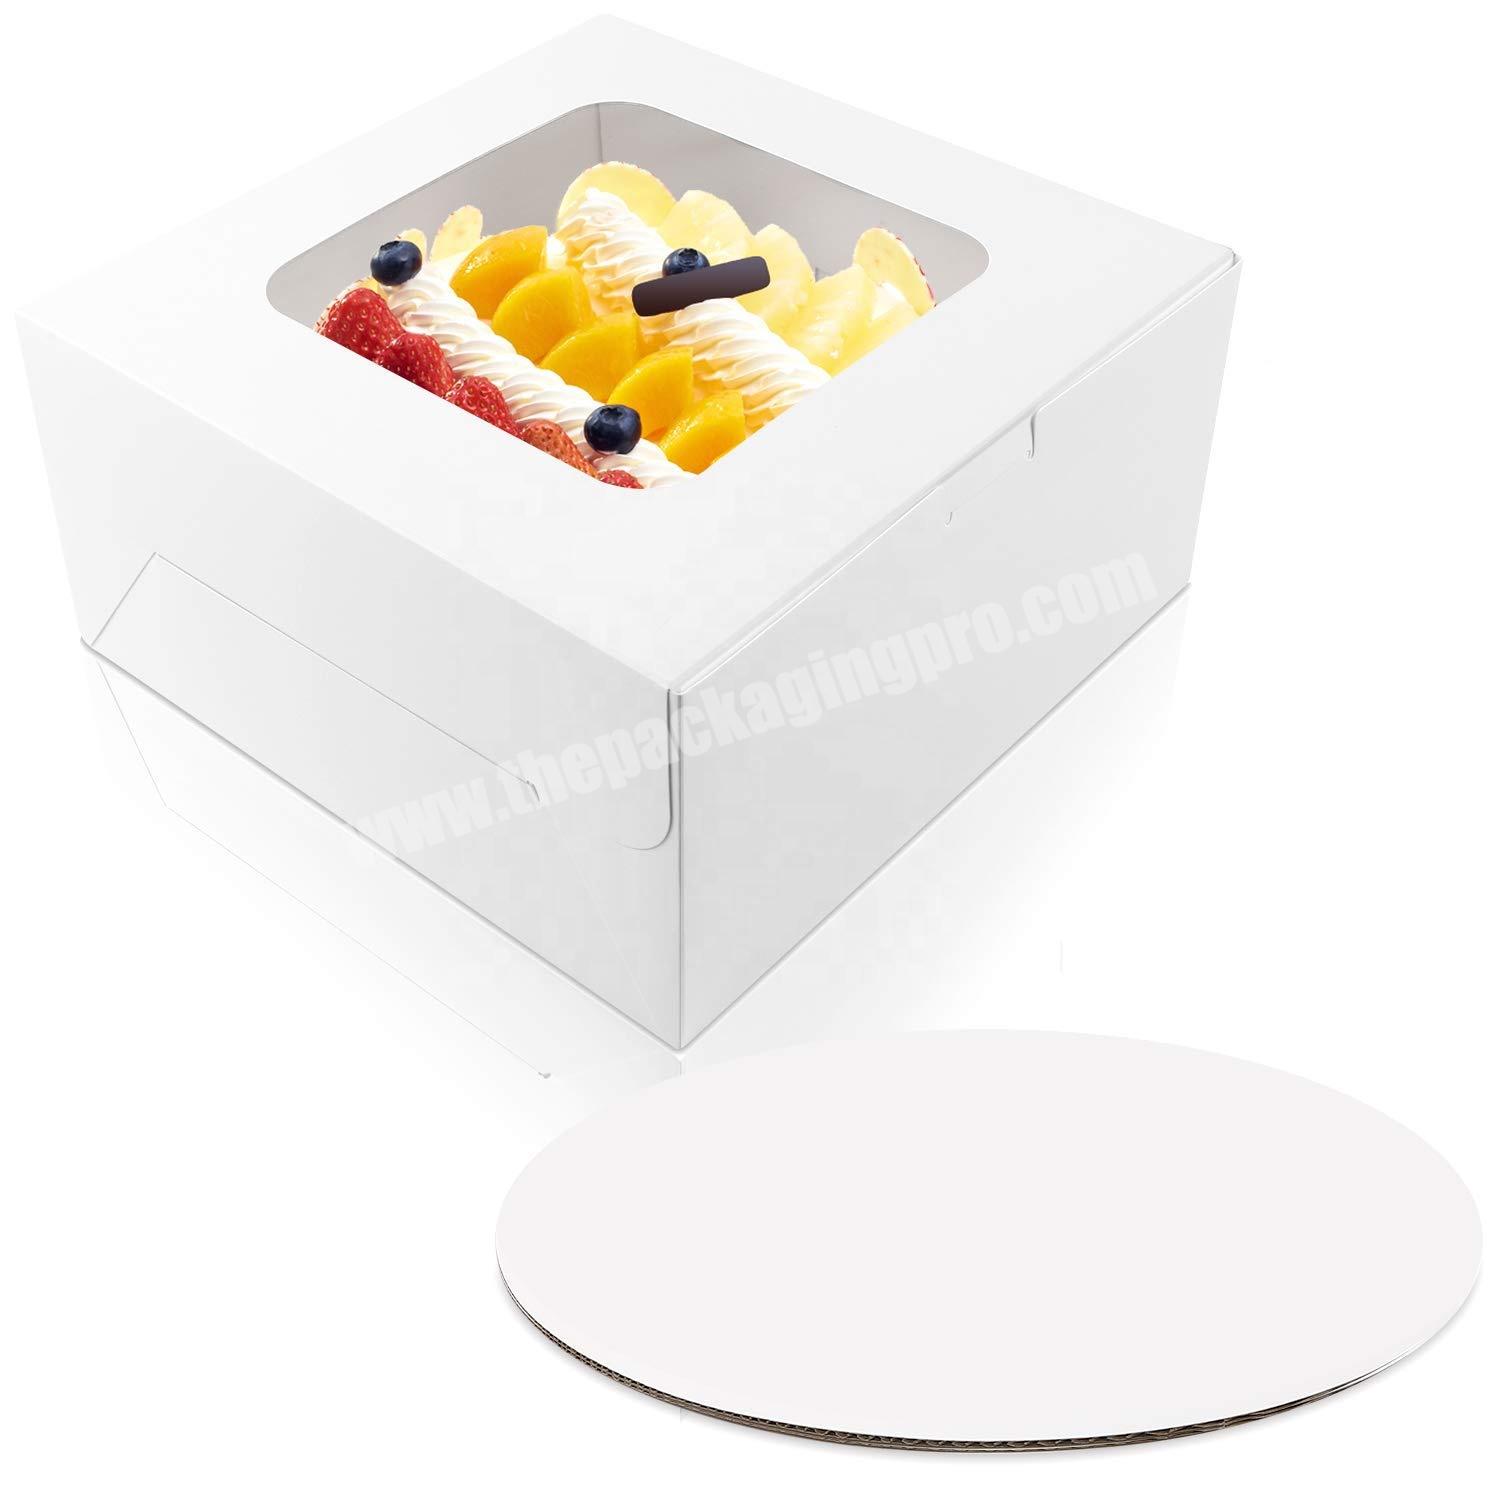 Cake Bakery Boxes with Window and 10 inches Round Cake Boards, gift Boxes for Cakes, Pastries, Pie